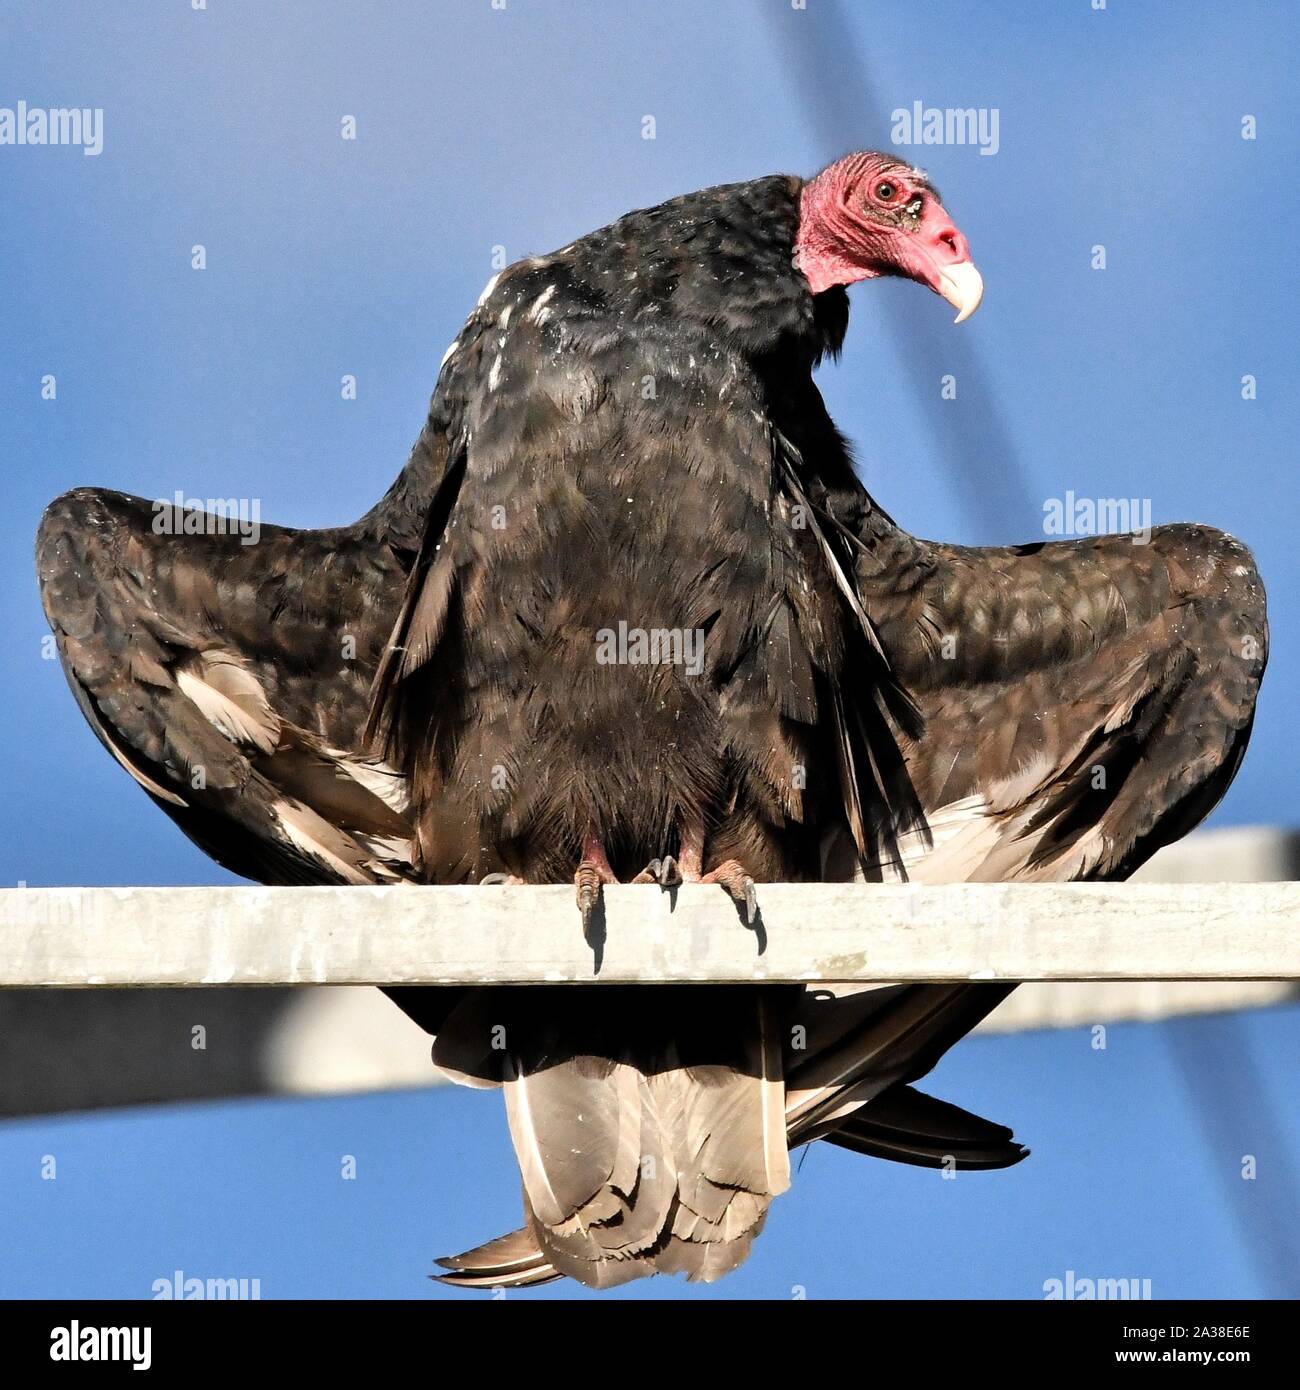 Turkey Vulture with spread wings, Colorado, United States Stock Photo